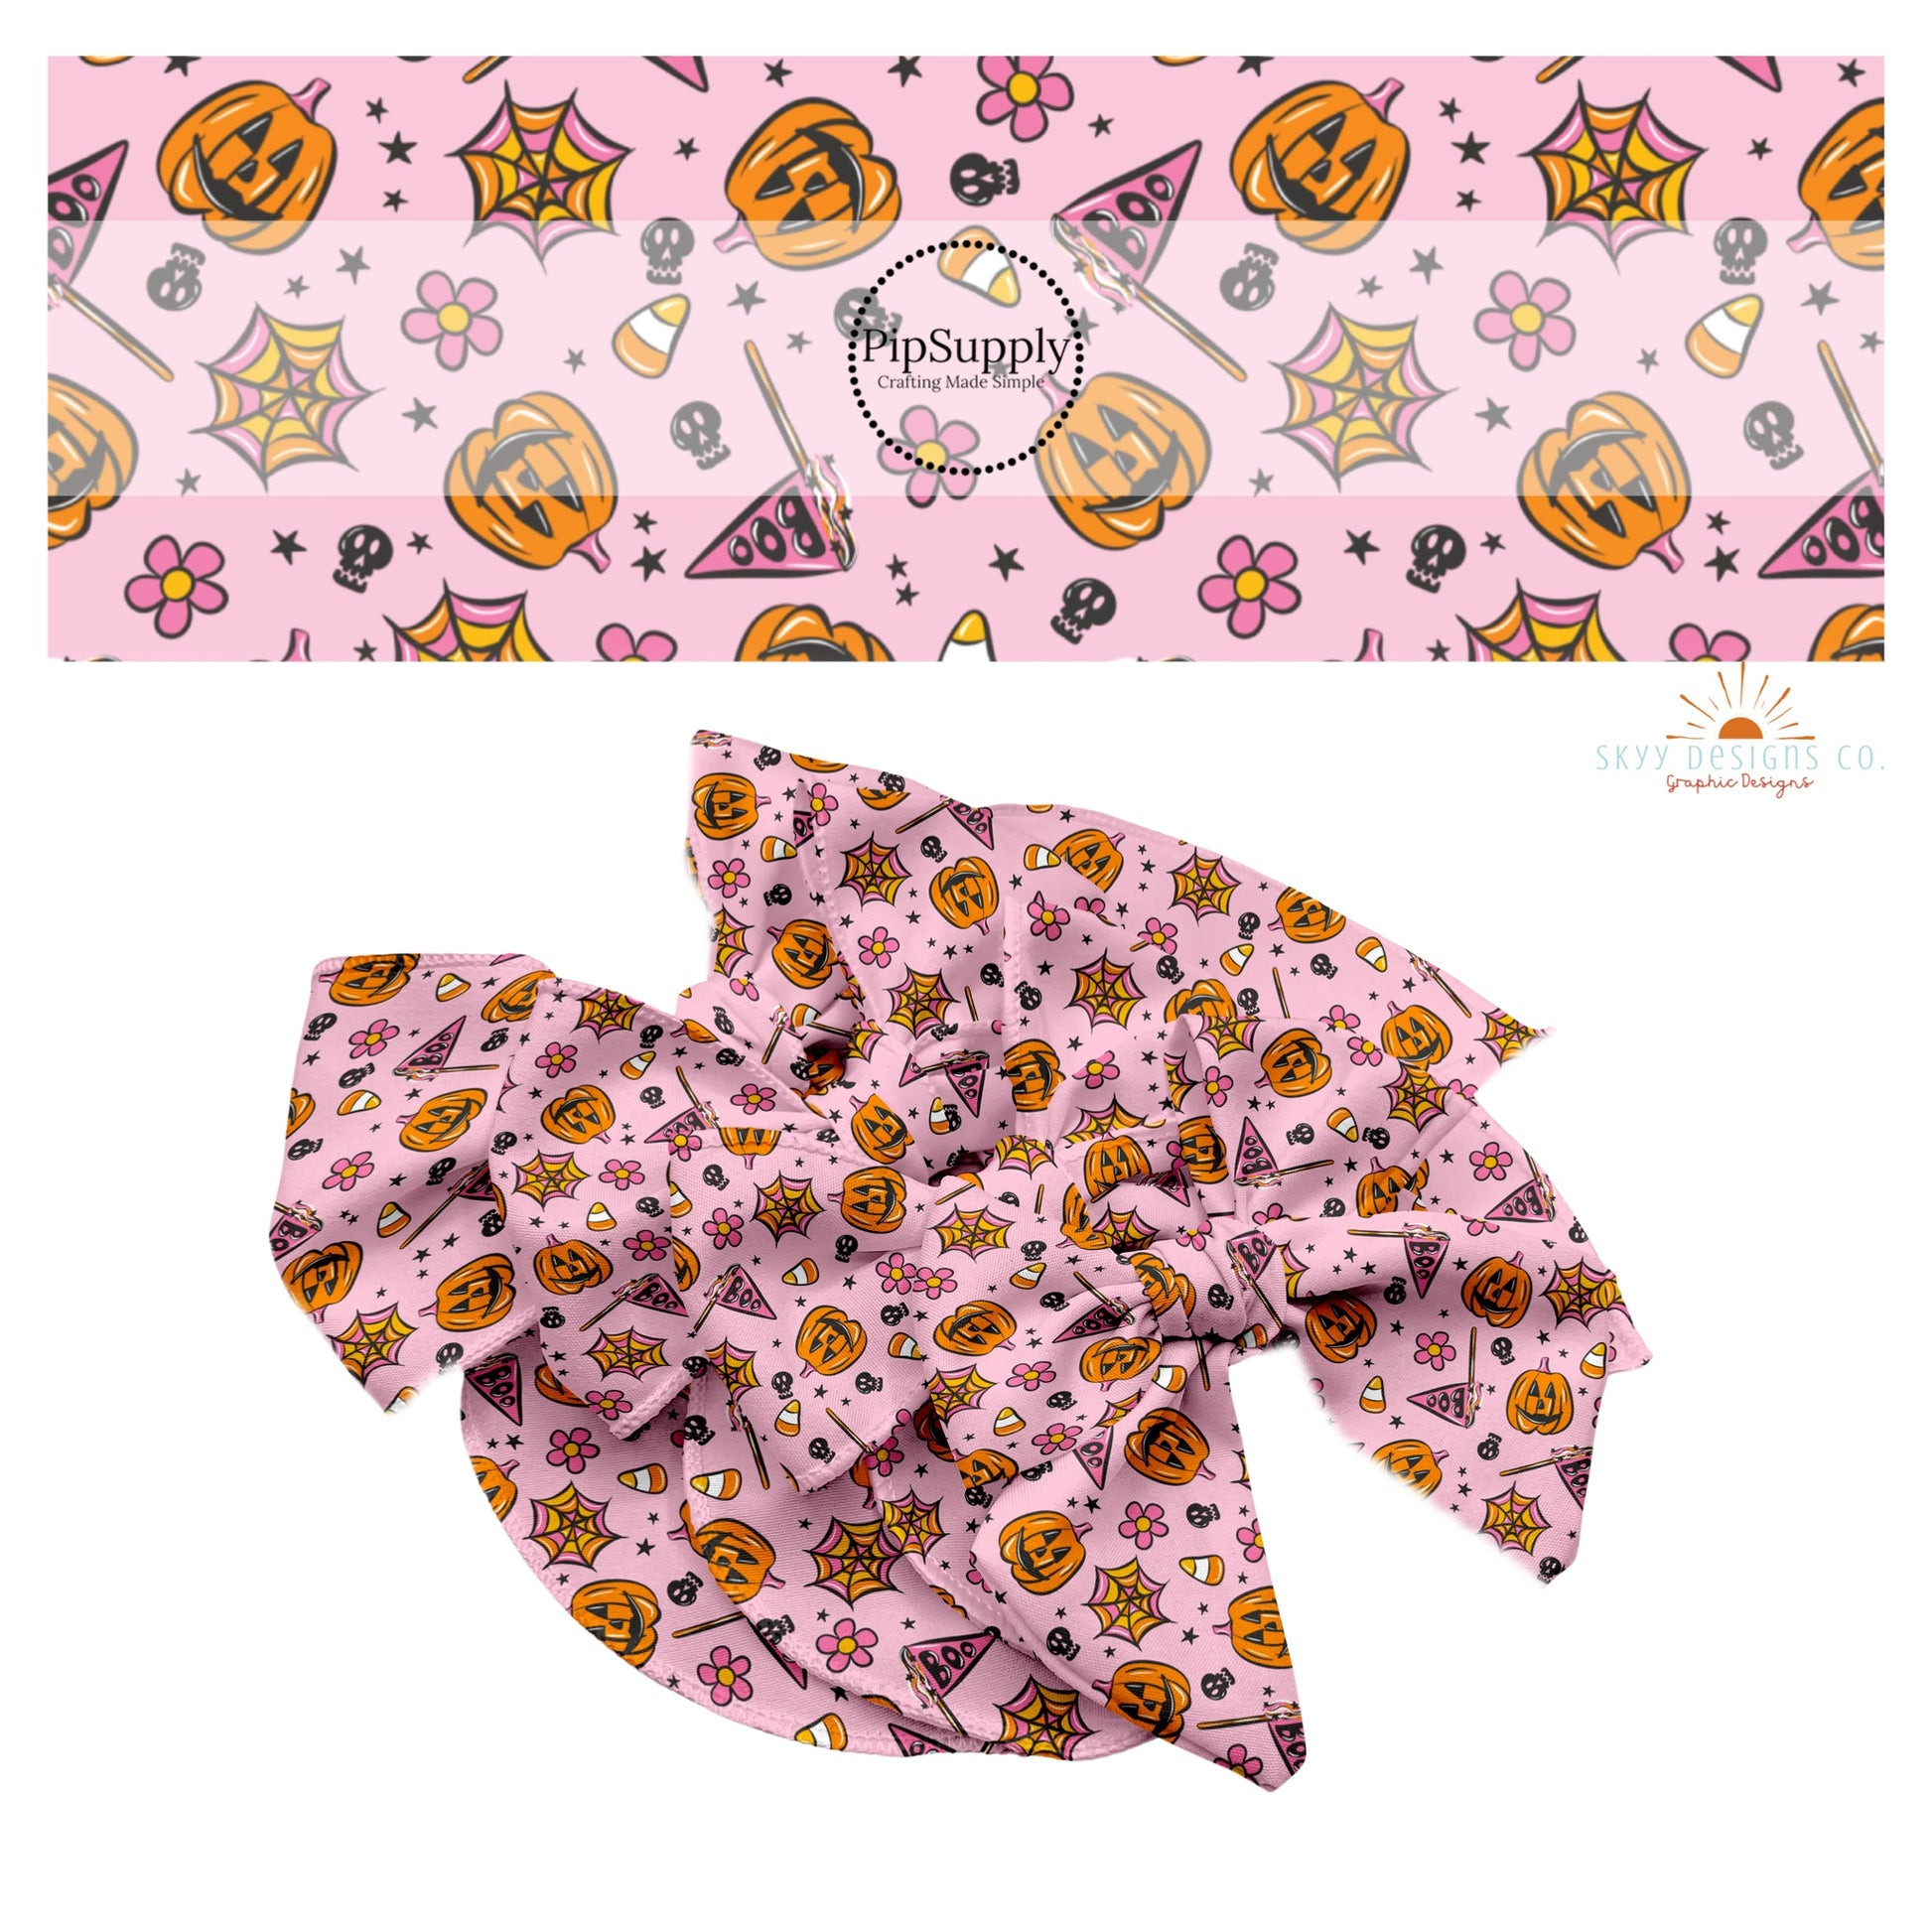 Pumpkins, candy, skulls, stars, flowers, webs, and flags on pink hair bow strips